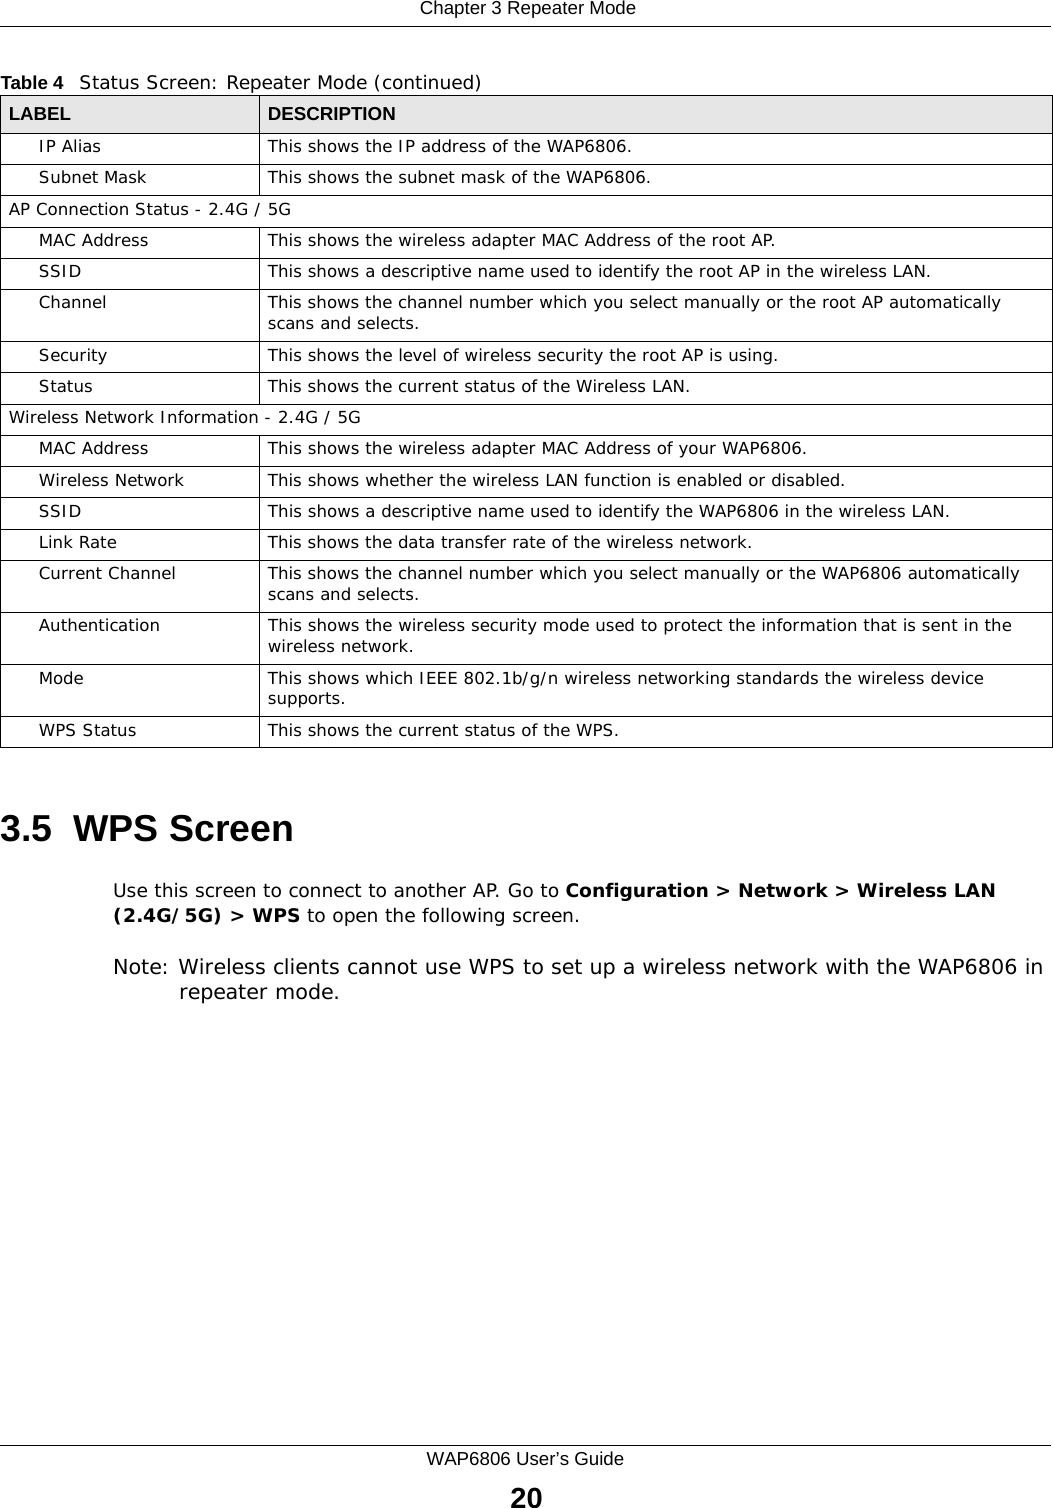  Chapter 3 Repeater ModeWAP6806 User’s Guide203.5  WPS ScreenUse this screen to connect to another AP. Go to Configuration &gt; Network &gt; Wireless LAN (2.4G/5G) &gt; WPS to open the following screen.Note: Wireless clients cannot use WPS to set up a wireless network with the WAP6806 in repeater mode. IP Alias This shows the IP address of the WAP6806.Subnet Mask This shows the subnet mask of the WAP6806.AP Connection Status - 2.4G / 5GMAC Address This shows the wireless adapter MAC Address of the root AP.SSID This shows a descriptive name used to identify the root AP in the wireless LAN. Channel This shows the channel number which you select manually or the root AP automatically scans and selects.Security This shows the level of wireless security the root AP is using.Status This shows the current status of the Wireless LAN.Wireless Network Information - 2.4G / 5GMAC Address This shows the wireless adapter MAC Address of your WAP6806.Wireless Network This shows whether the wireless LAN function is enabled or disabled.SSID This shows a descriptive name used to identify the WAP6806 in the wireless LAN. Link Rate This shows the data transfer rate of the wireless network.Current Channel This shows the channel number which you select manually or the WAP6806 automatically scans and selects.Authentication This shows the wireless security mode used to protect the information that is sent in the wireless network.Mode This shows which IEEE 802.1b/g/n wireless networking standards the wireless device supports.WPS Status This shows the current status of the WPS.Table 4   Status Screen: Repeater Mode (continued) LABEL DESCRIPTION